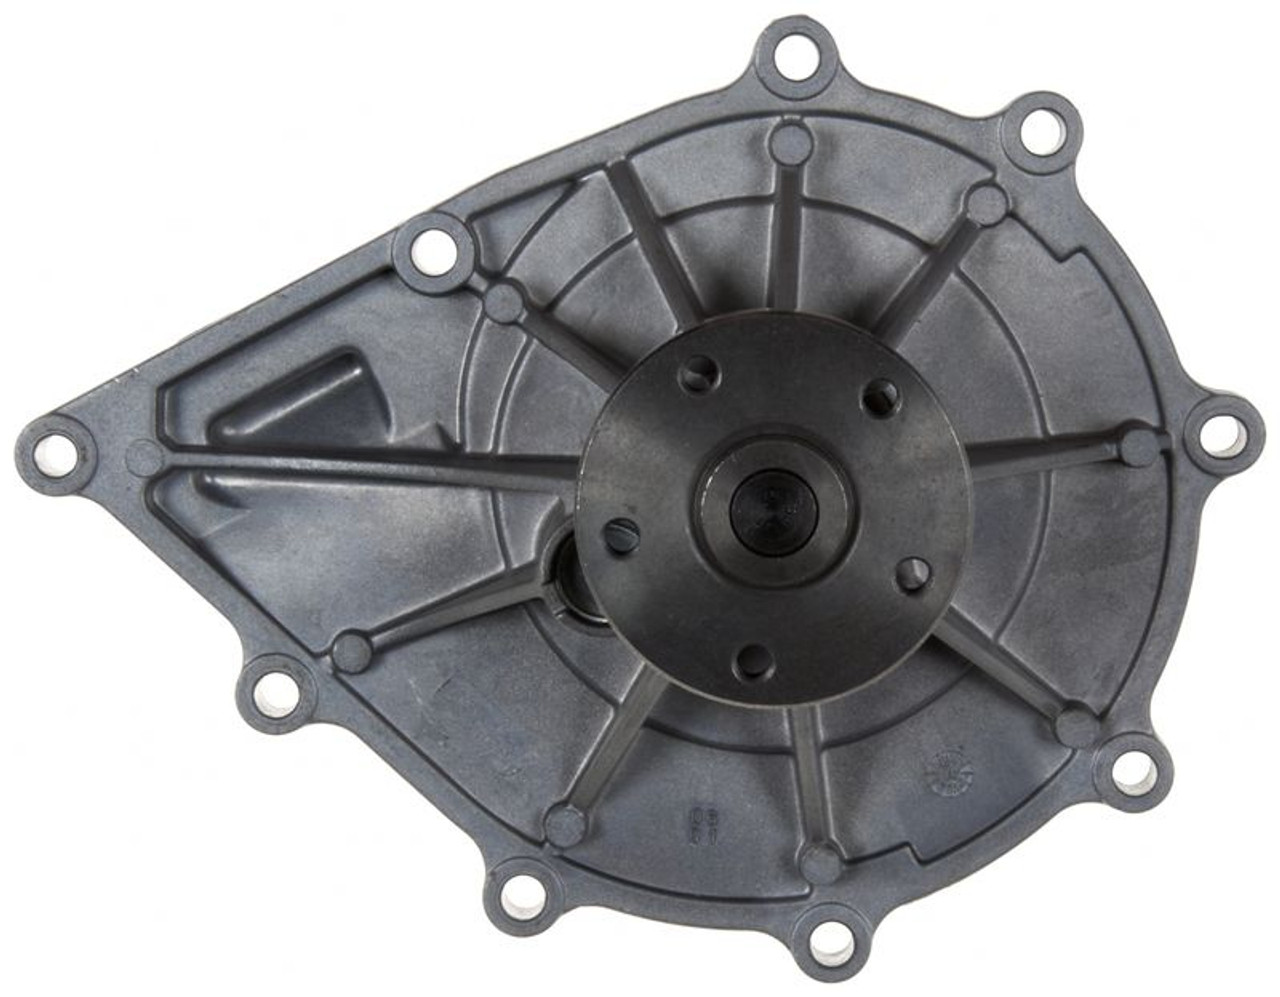 Gates 44057HD Water Pump- Detroit DD (single speed)- replaces A4722000401